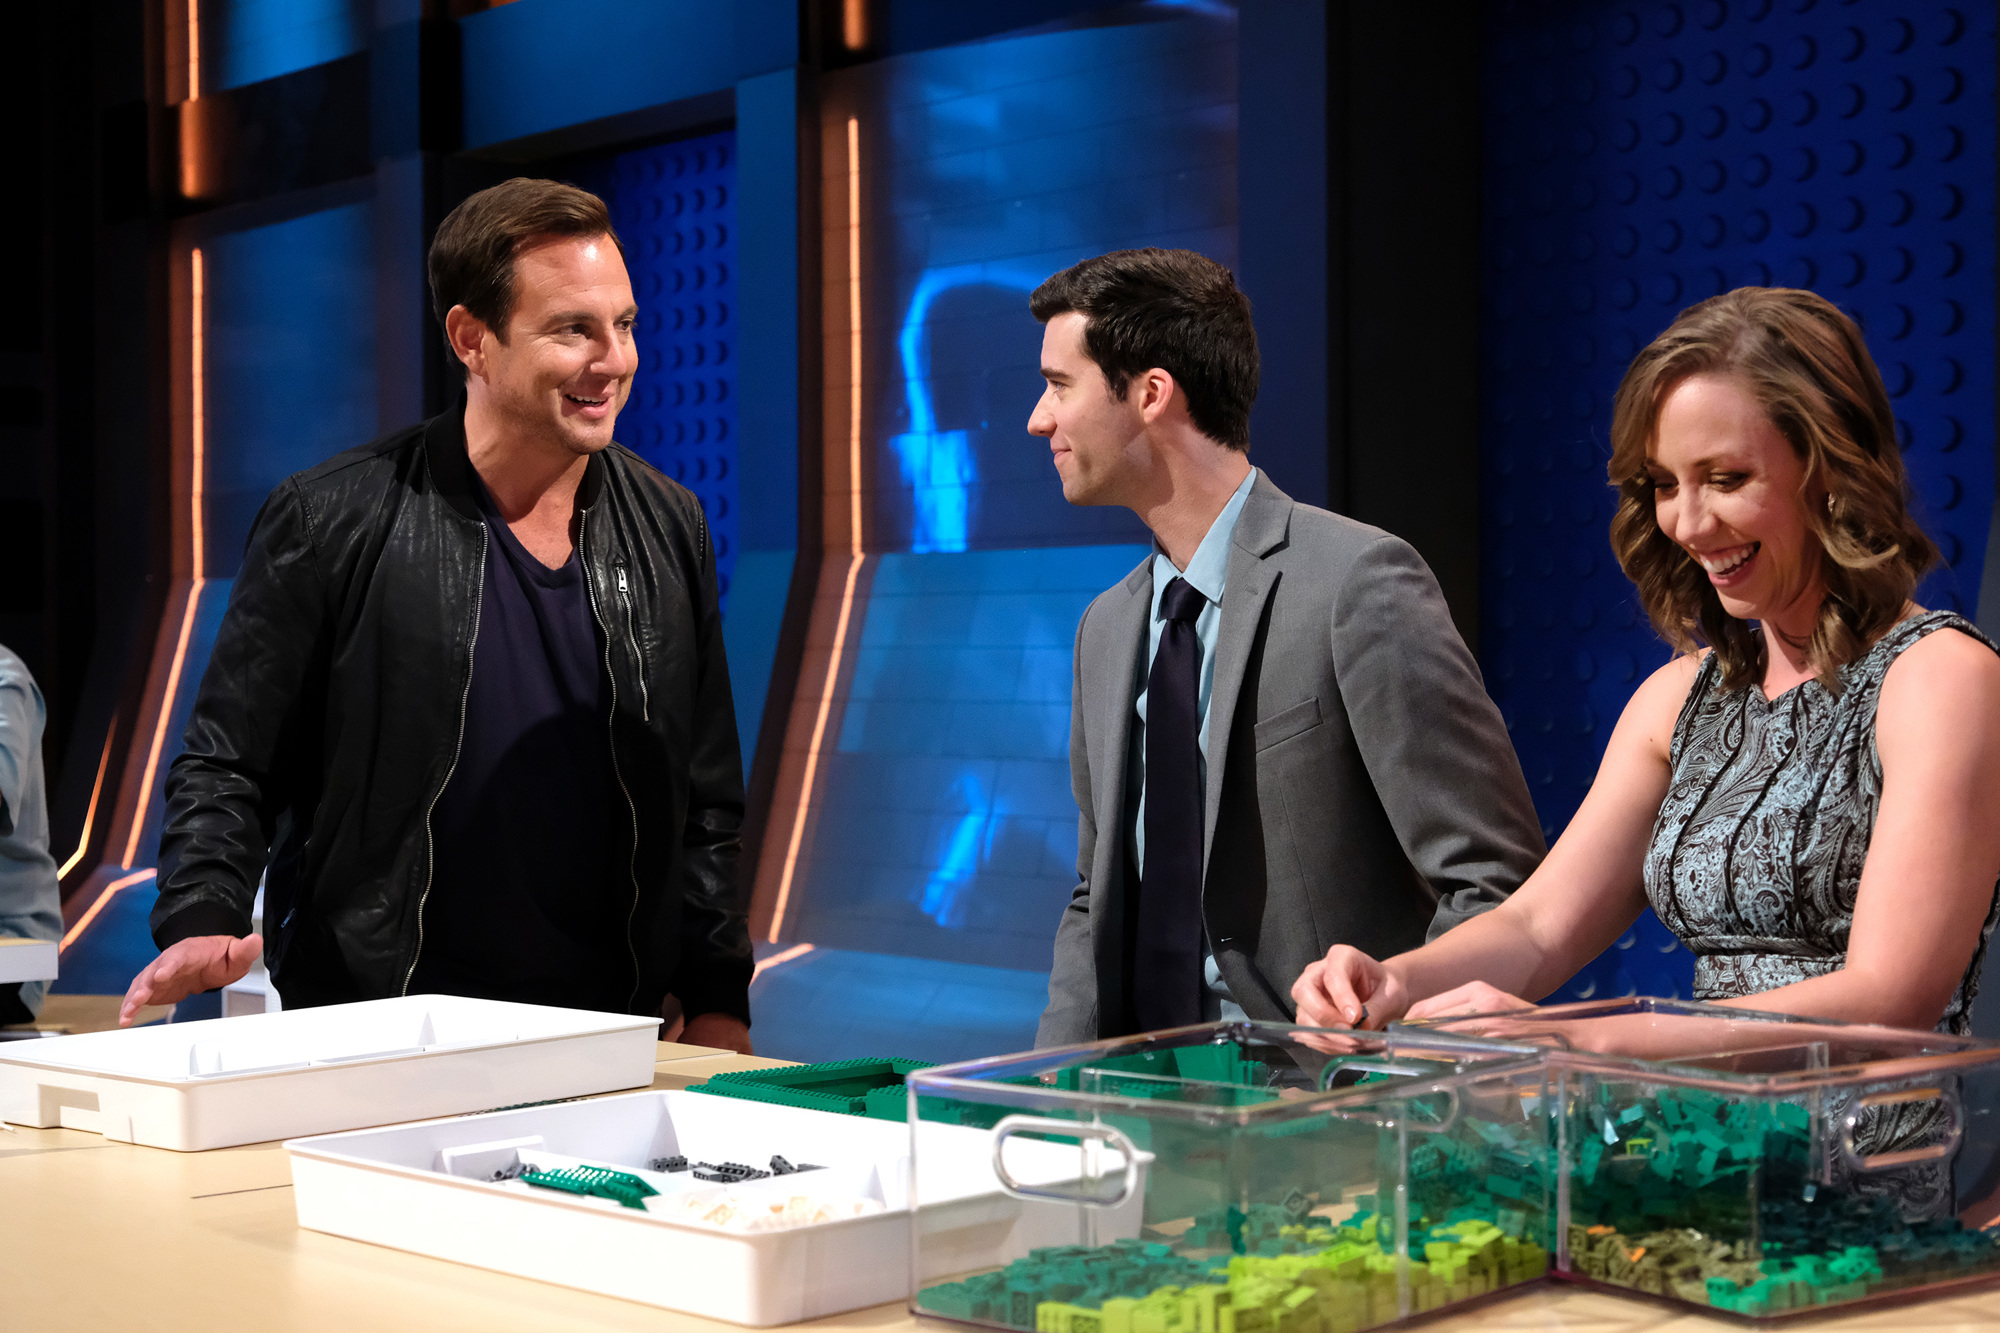 'LEGO MASTERS' host Will Arnett talks with Tyler and Amy Clites about their concept for design. Arnett did the voice for 